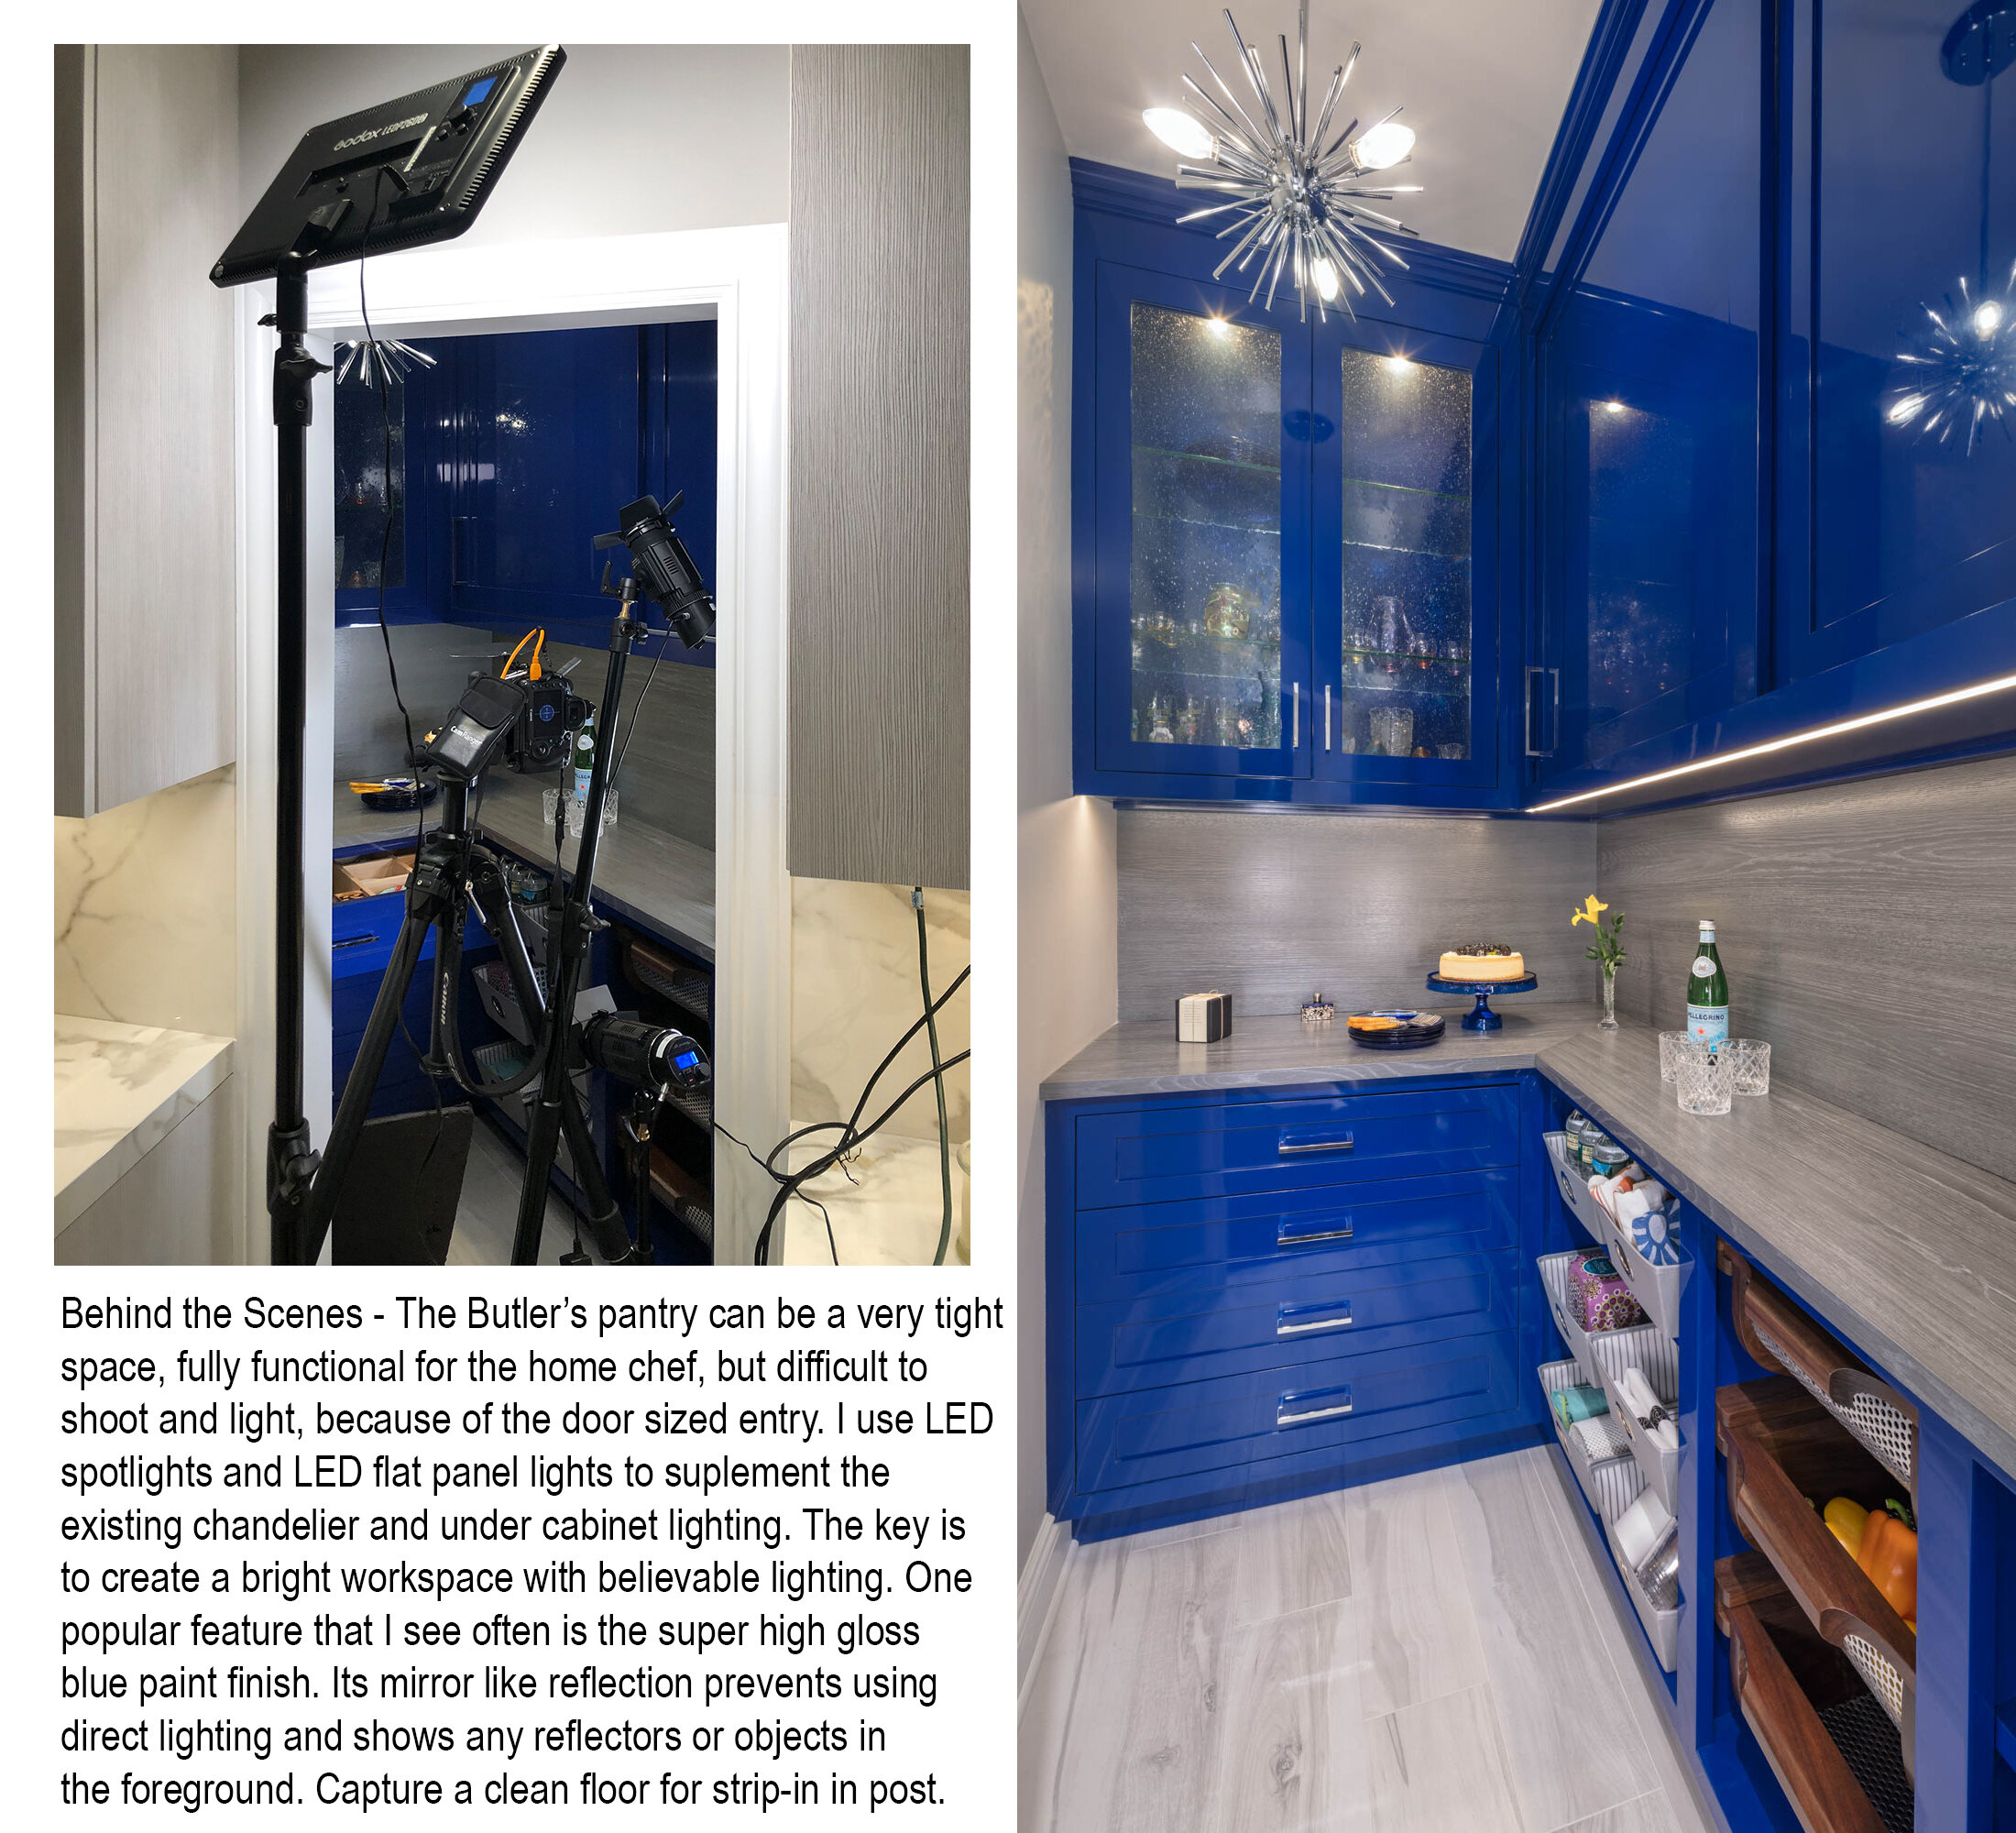 Behind The Scenes - Lighting a Butler's Pantry with high gloss blue paint.